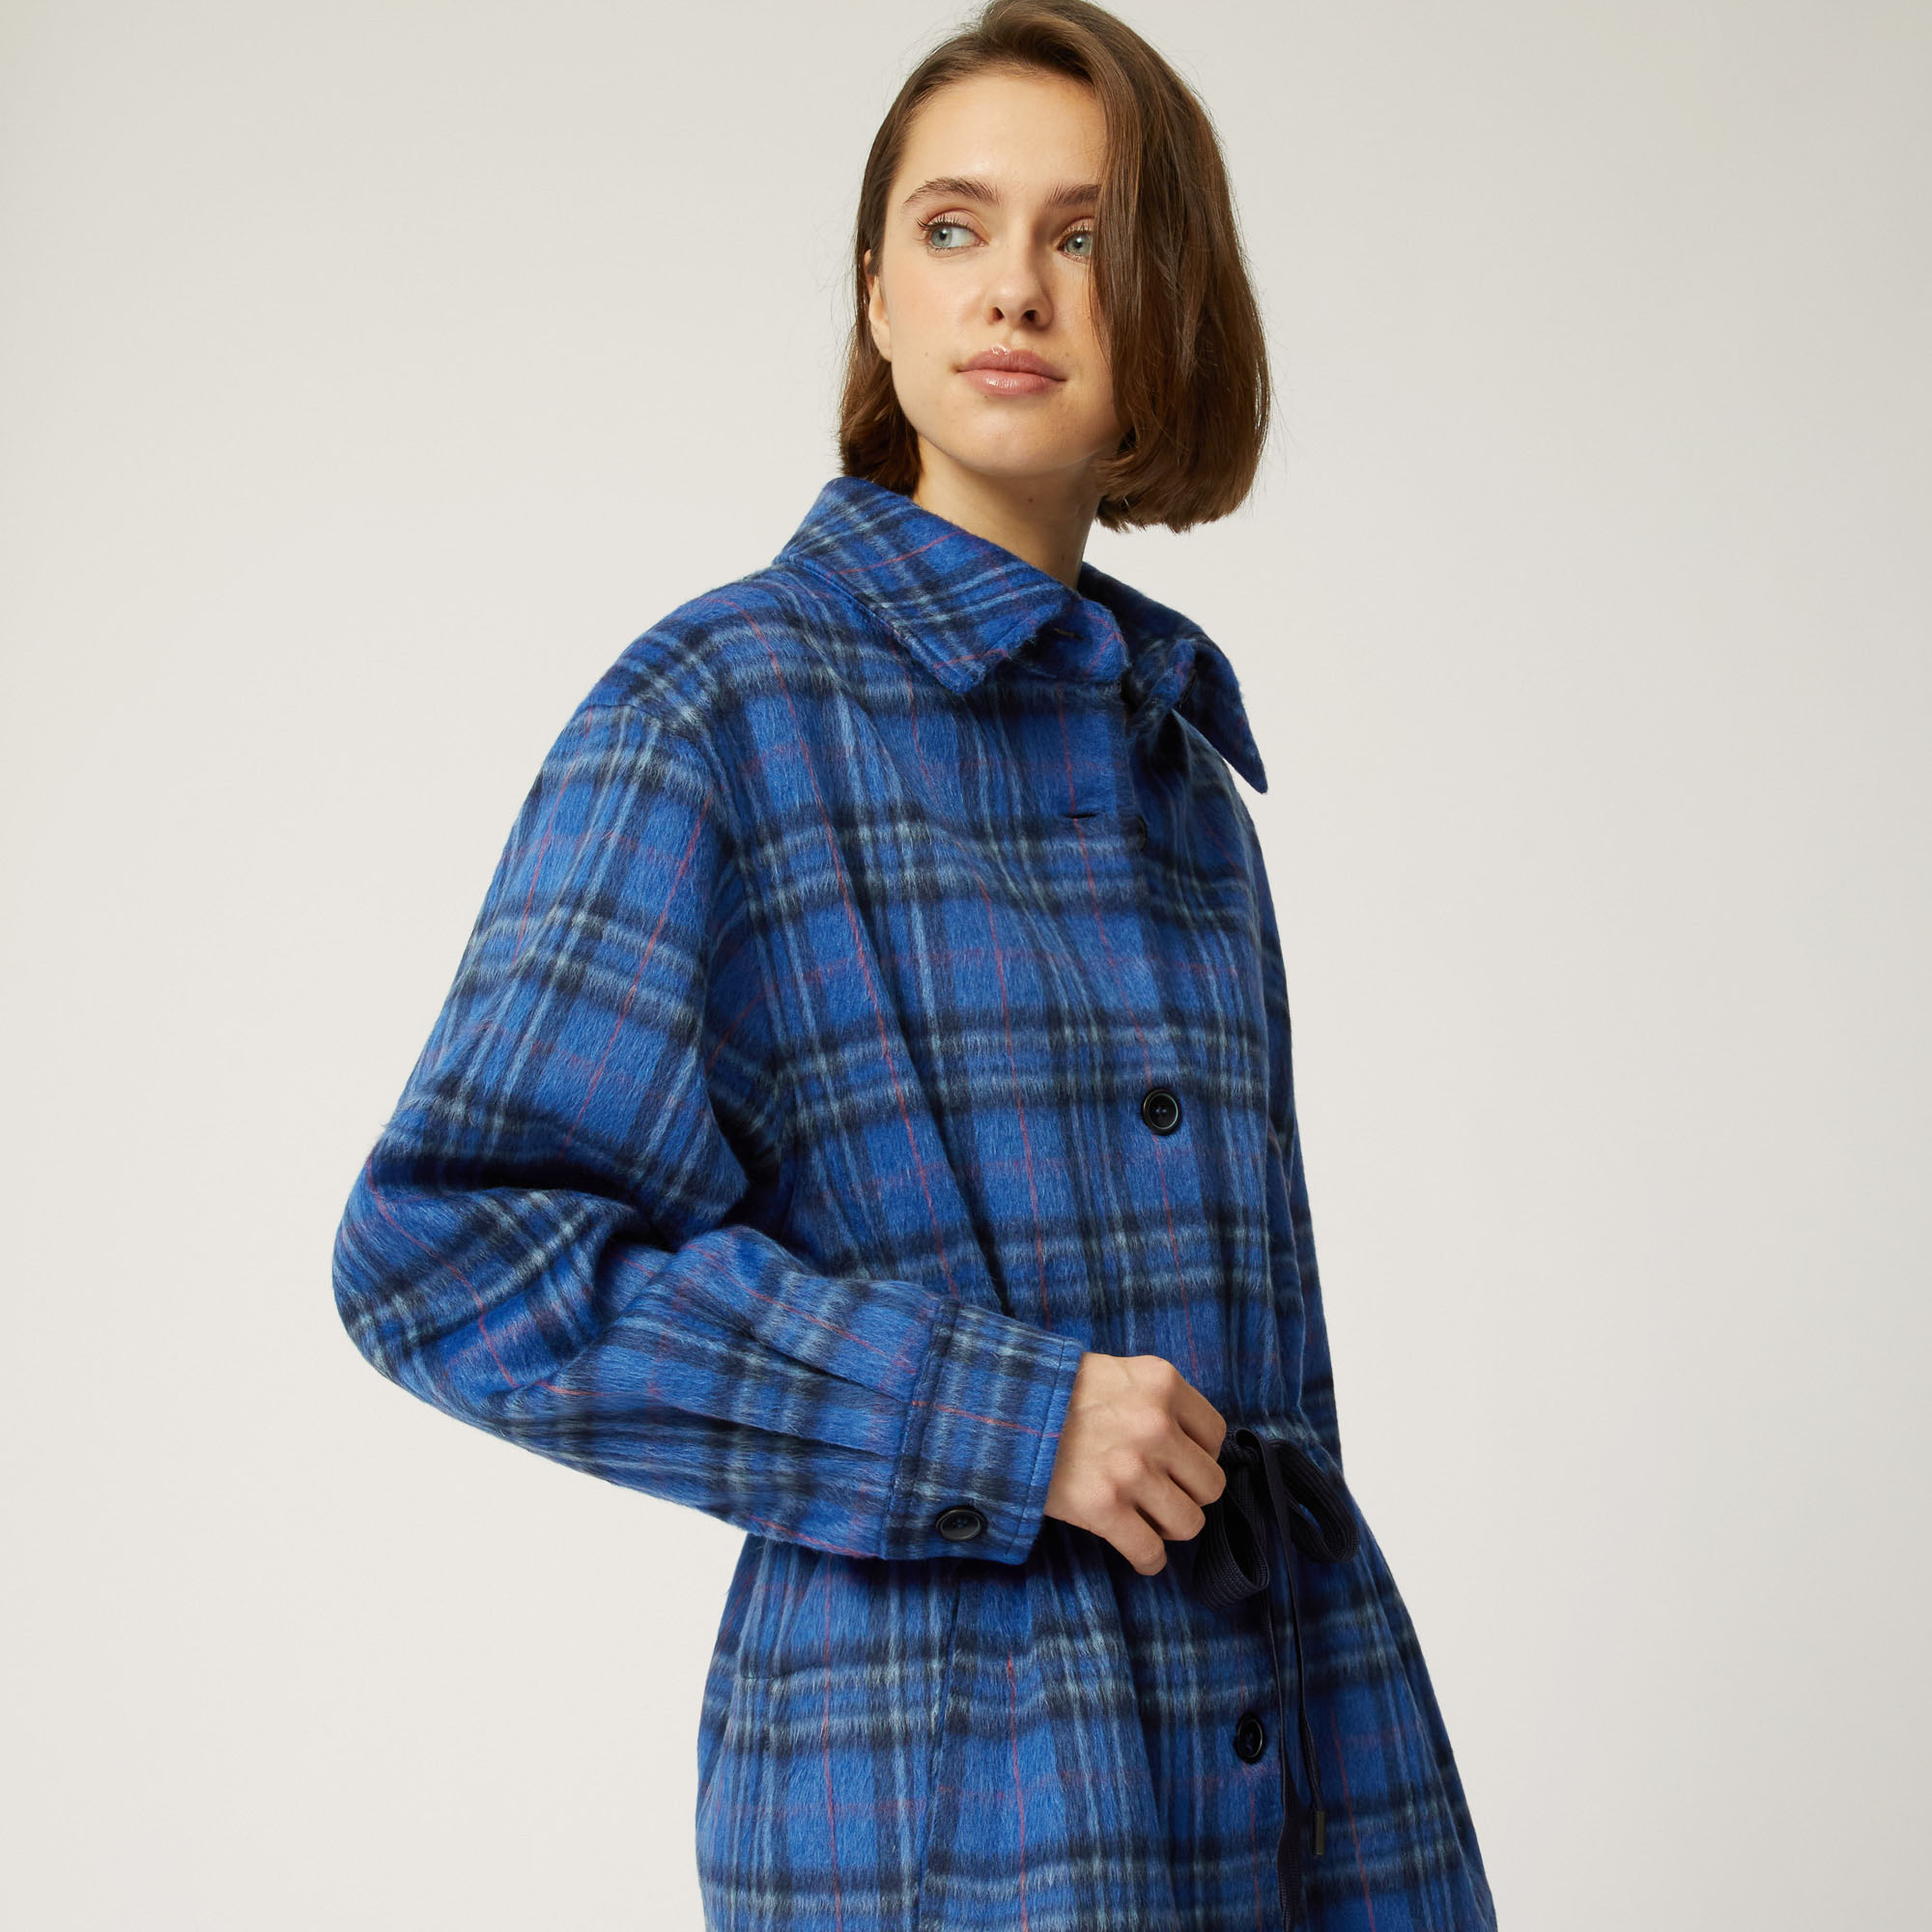 Chequered Jacket With Drawstring Waist, Light Blue, large